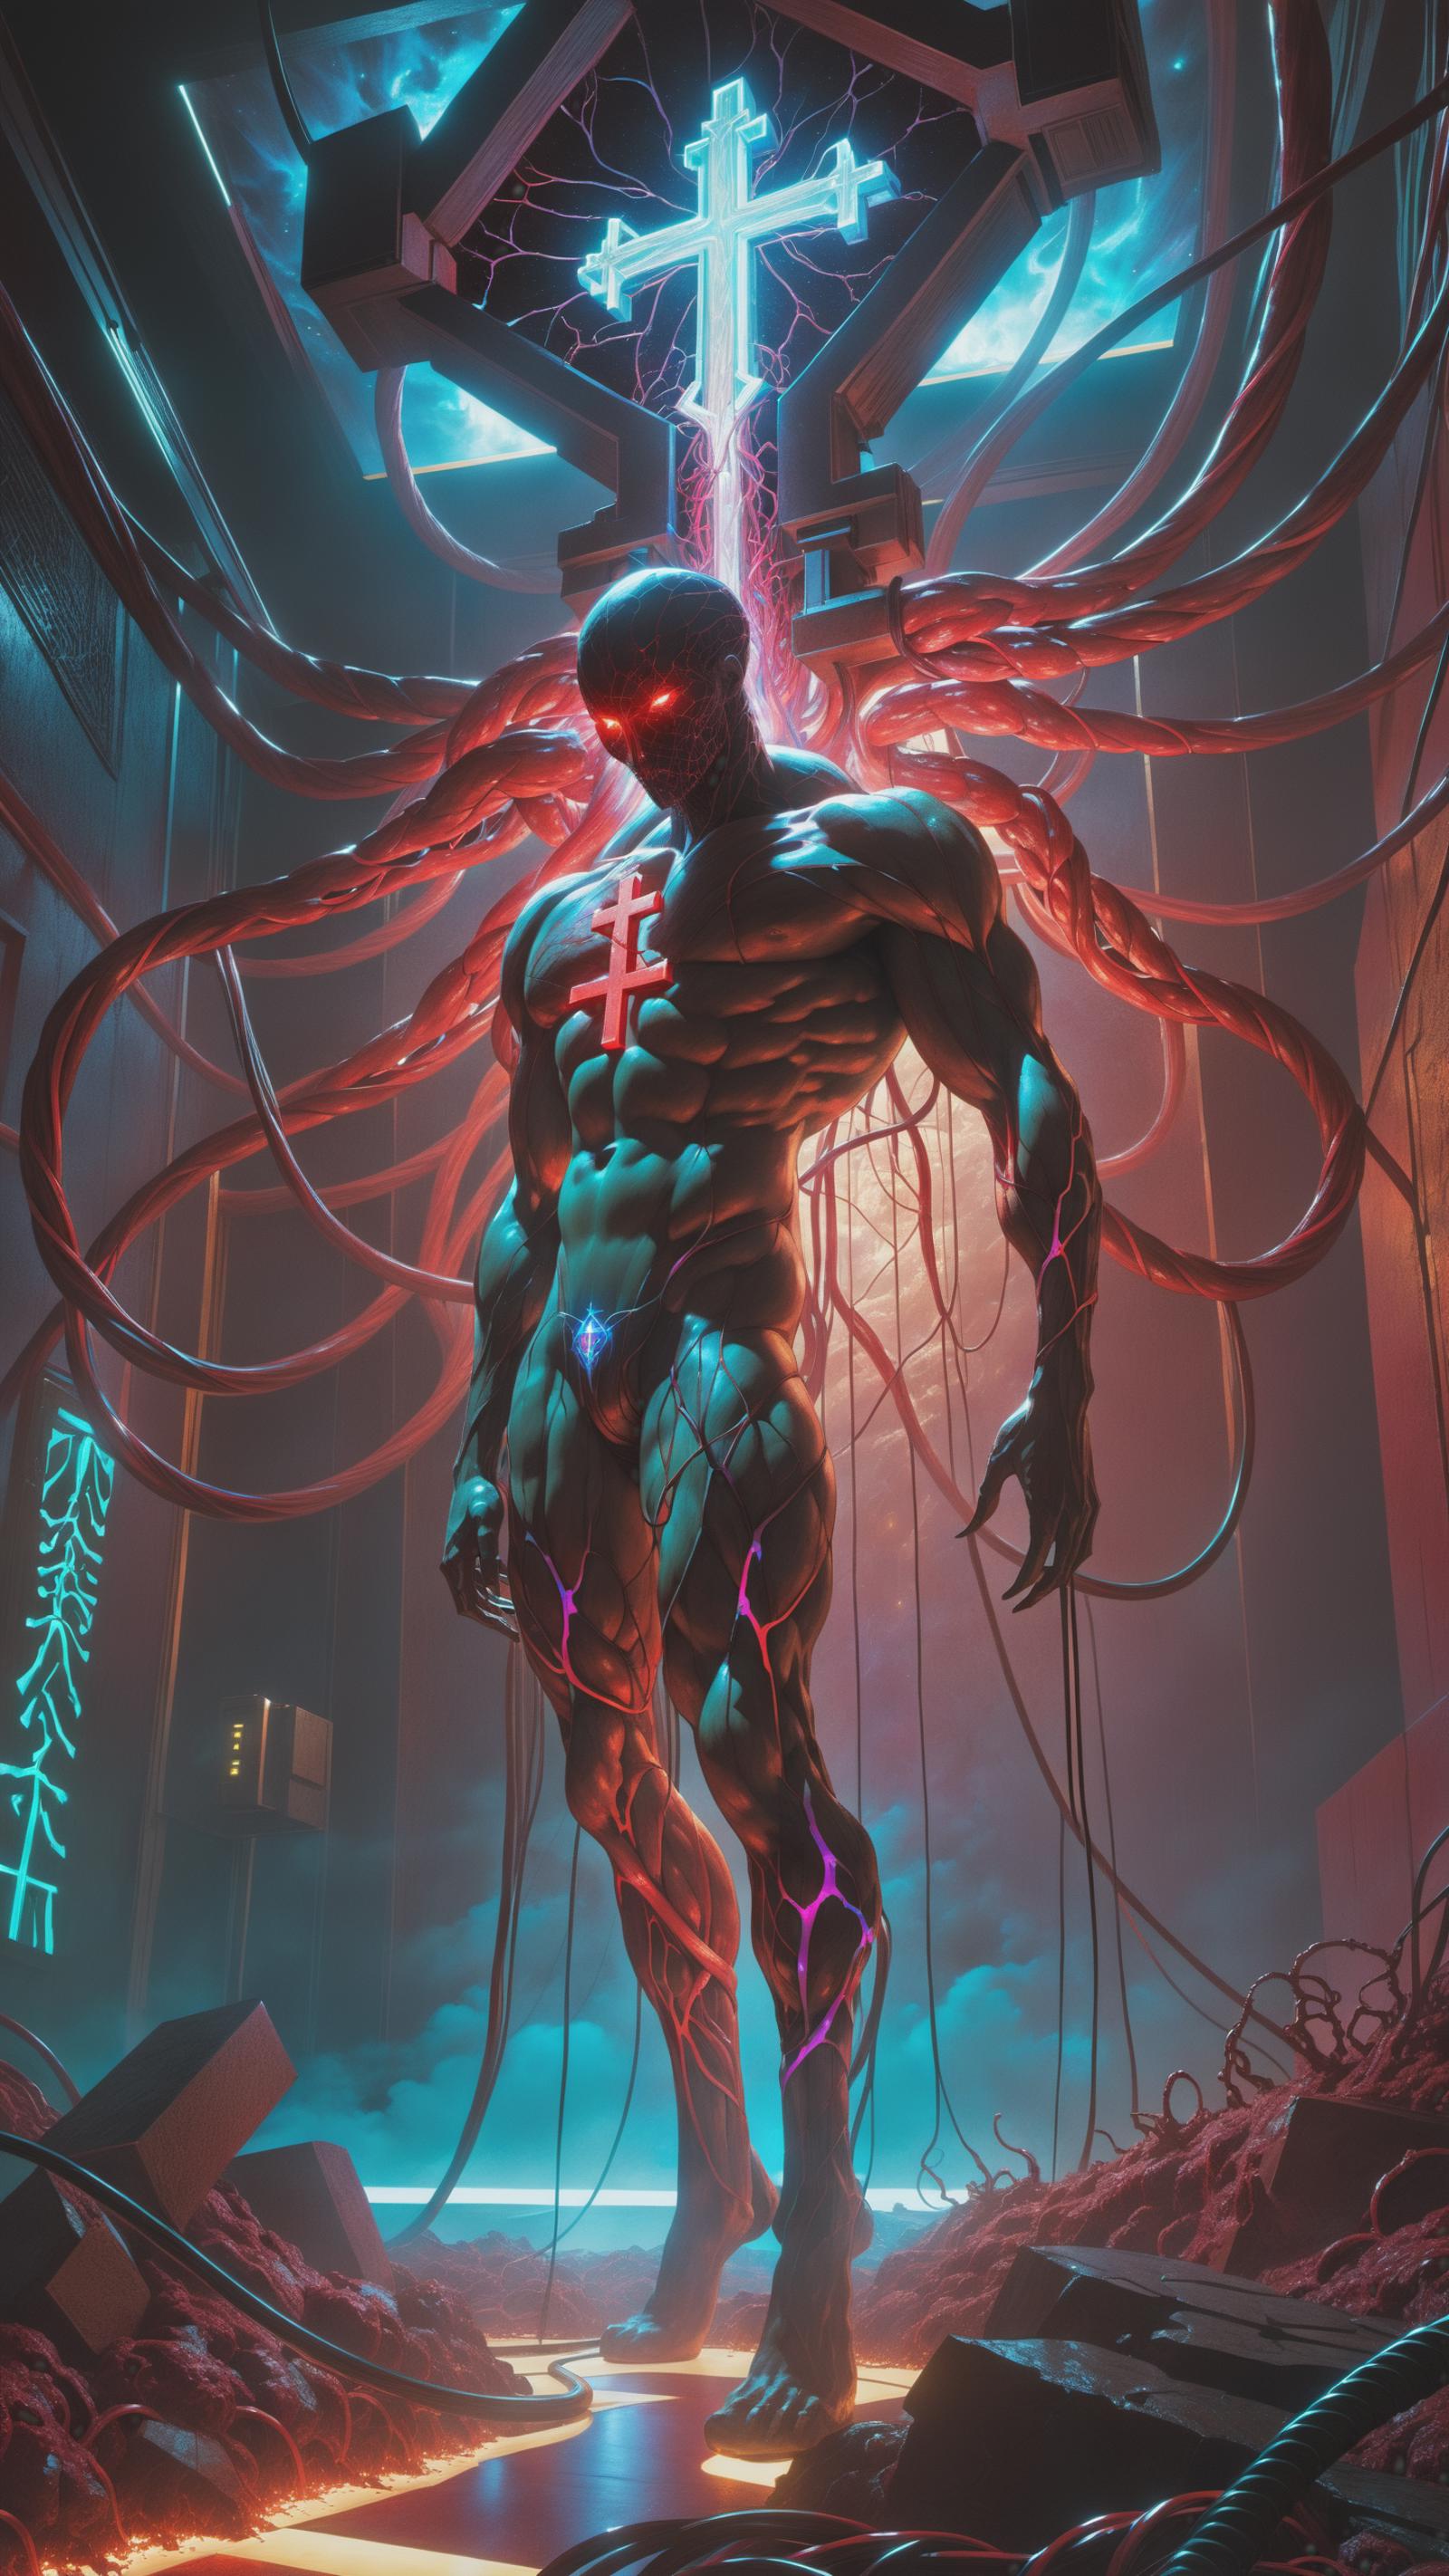 The image features a muscular, shirtless man with a red cross on his chest, standing in a dark room. He is surrounded by numerous cords and wires, giving the impression of being connected to a machine or a complex system. The man appears to be the main focus of the scene, with his muscular build and the prominent red cross on his chest.